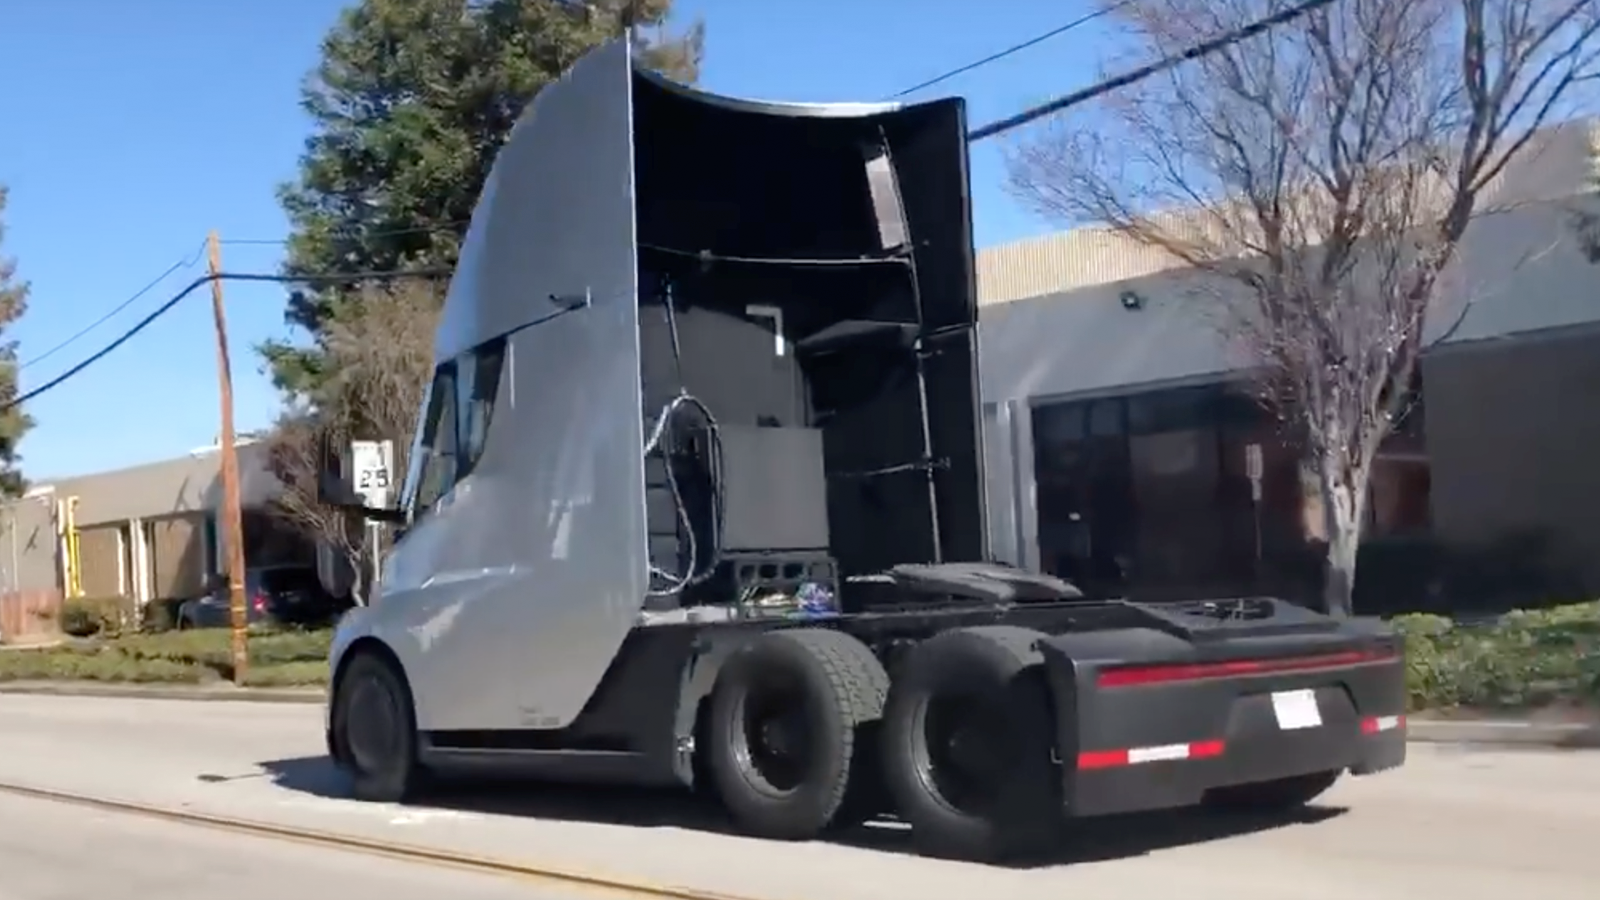 Leaked Images Show Geely’s Big Truck That Could Go Head-To-Head With The Tesla Semi